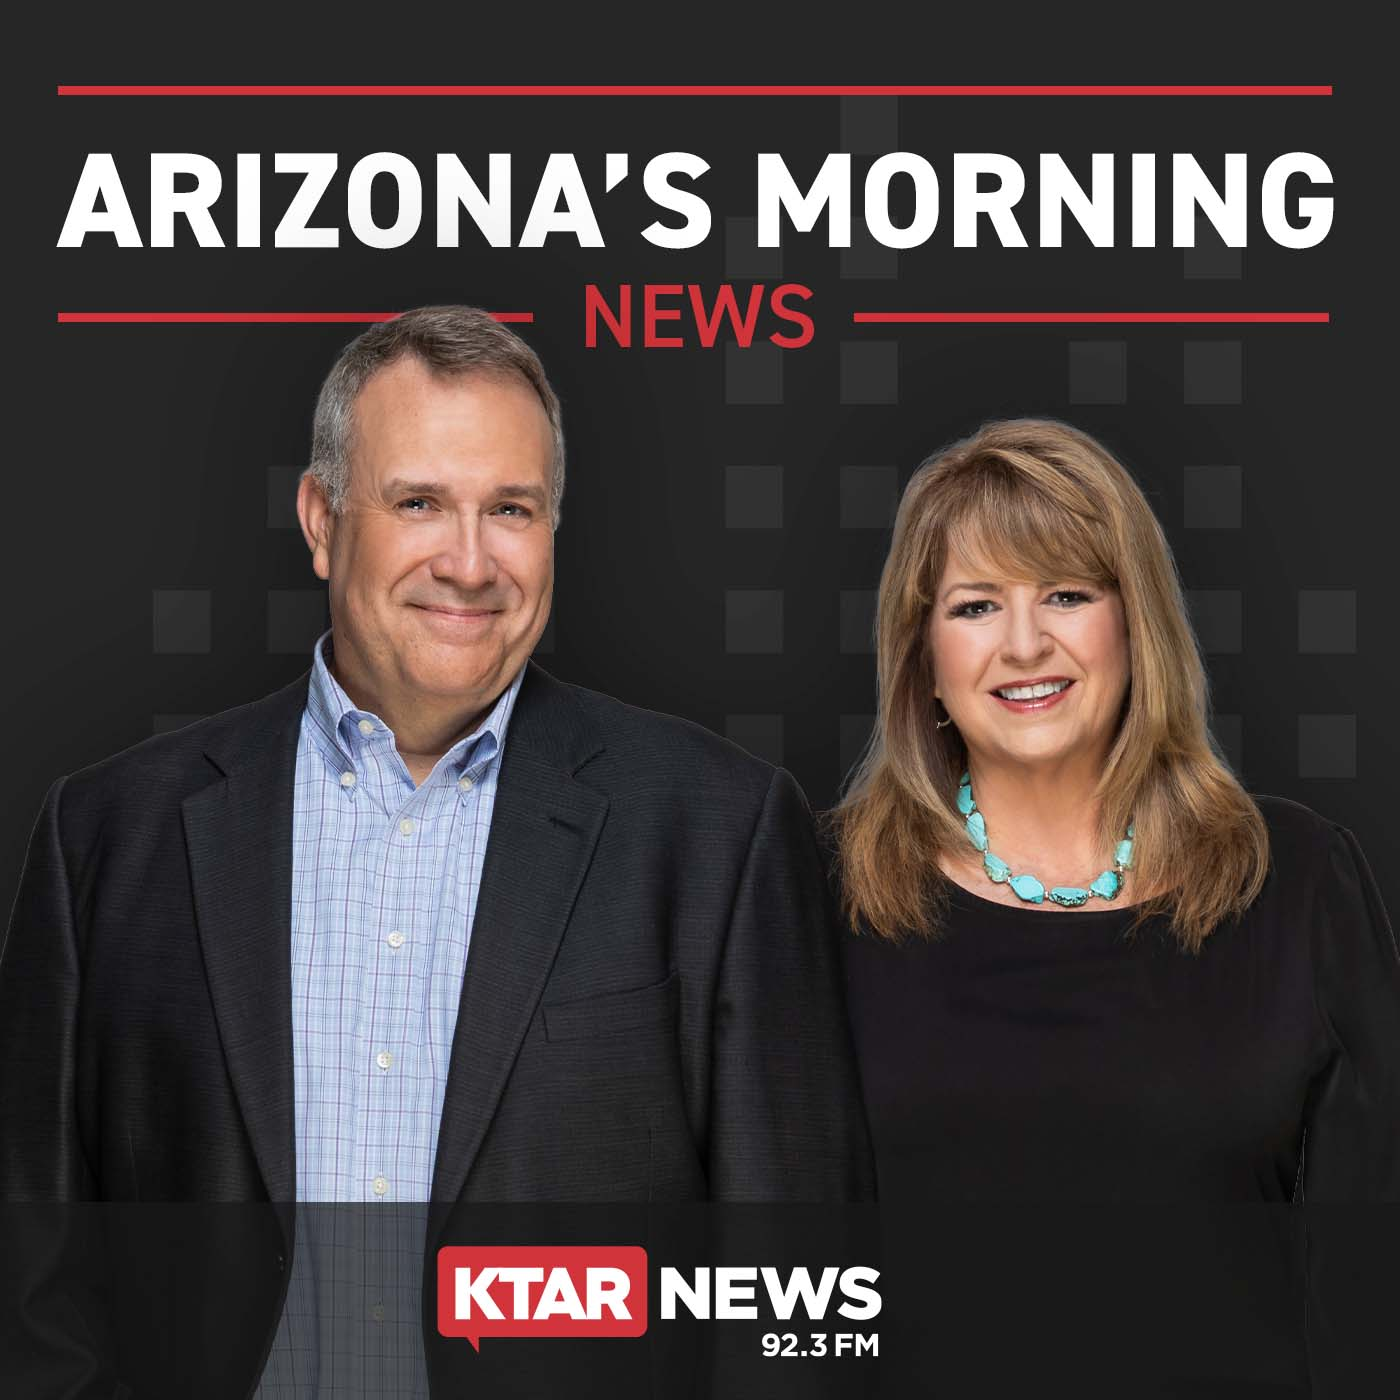 Sharper Point Commentary - Tax cuts and affordable housing in Arizona